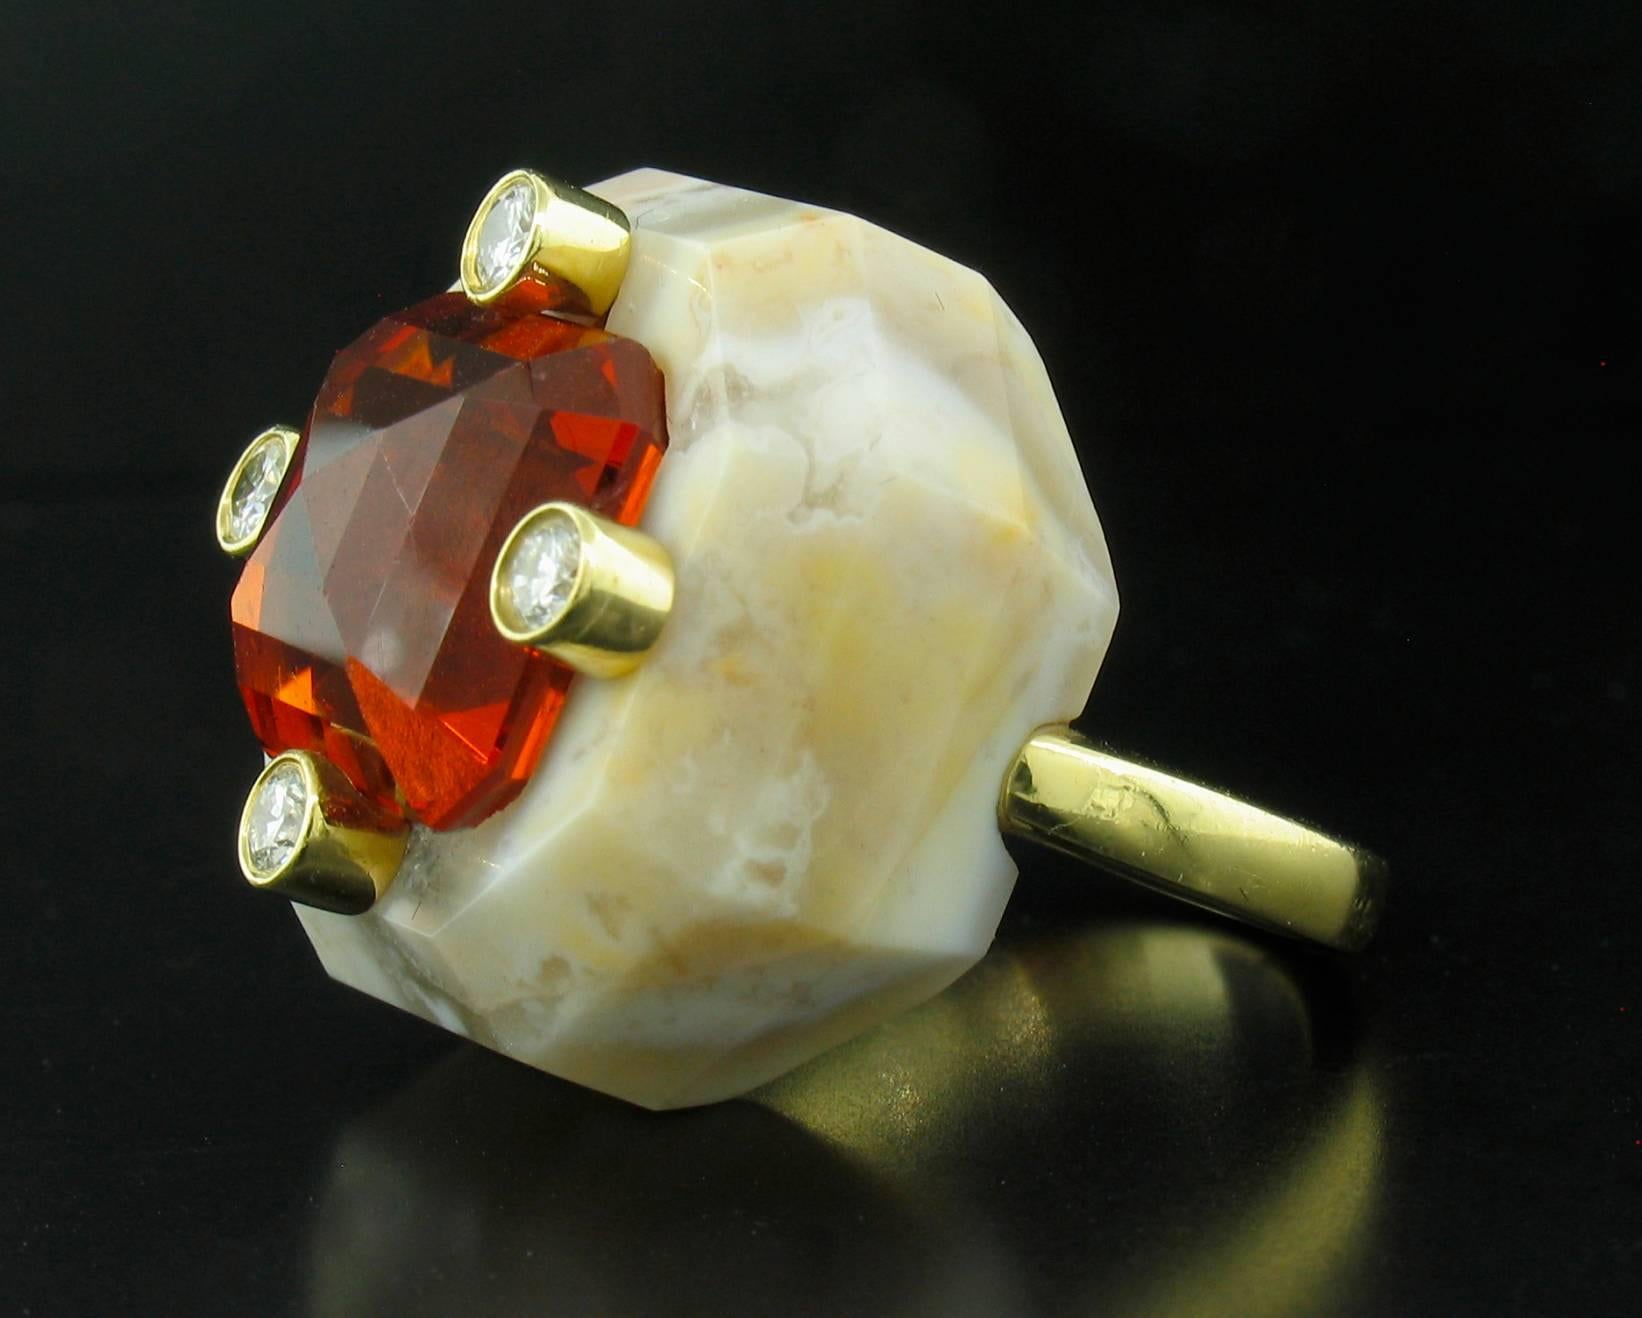 Designer Nicholas Varney's Signature 'Duo' Ring features a banded agate base with a stunning 15.55ct Square Step-cut Spessartite of the highest quality.  Spessartite in this color is very rare.  In fact, the only rarer garnet is the Demantoid.  This